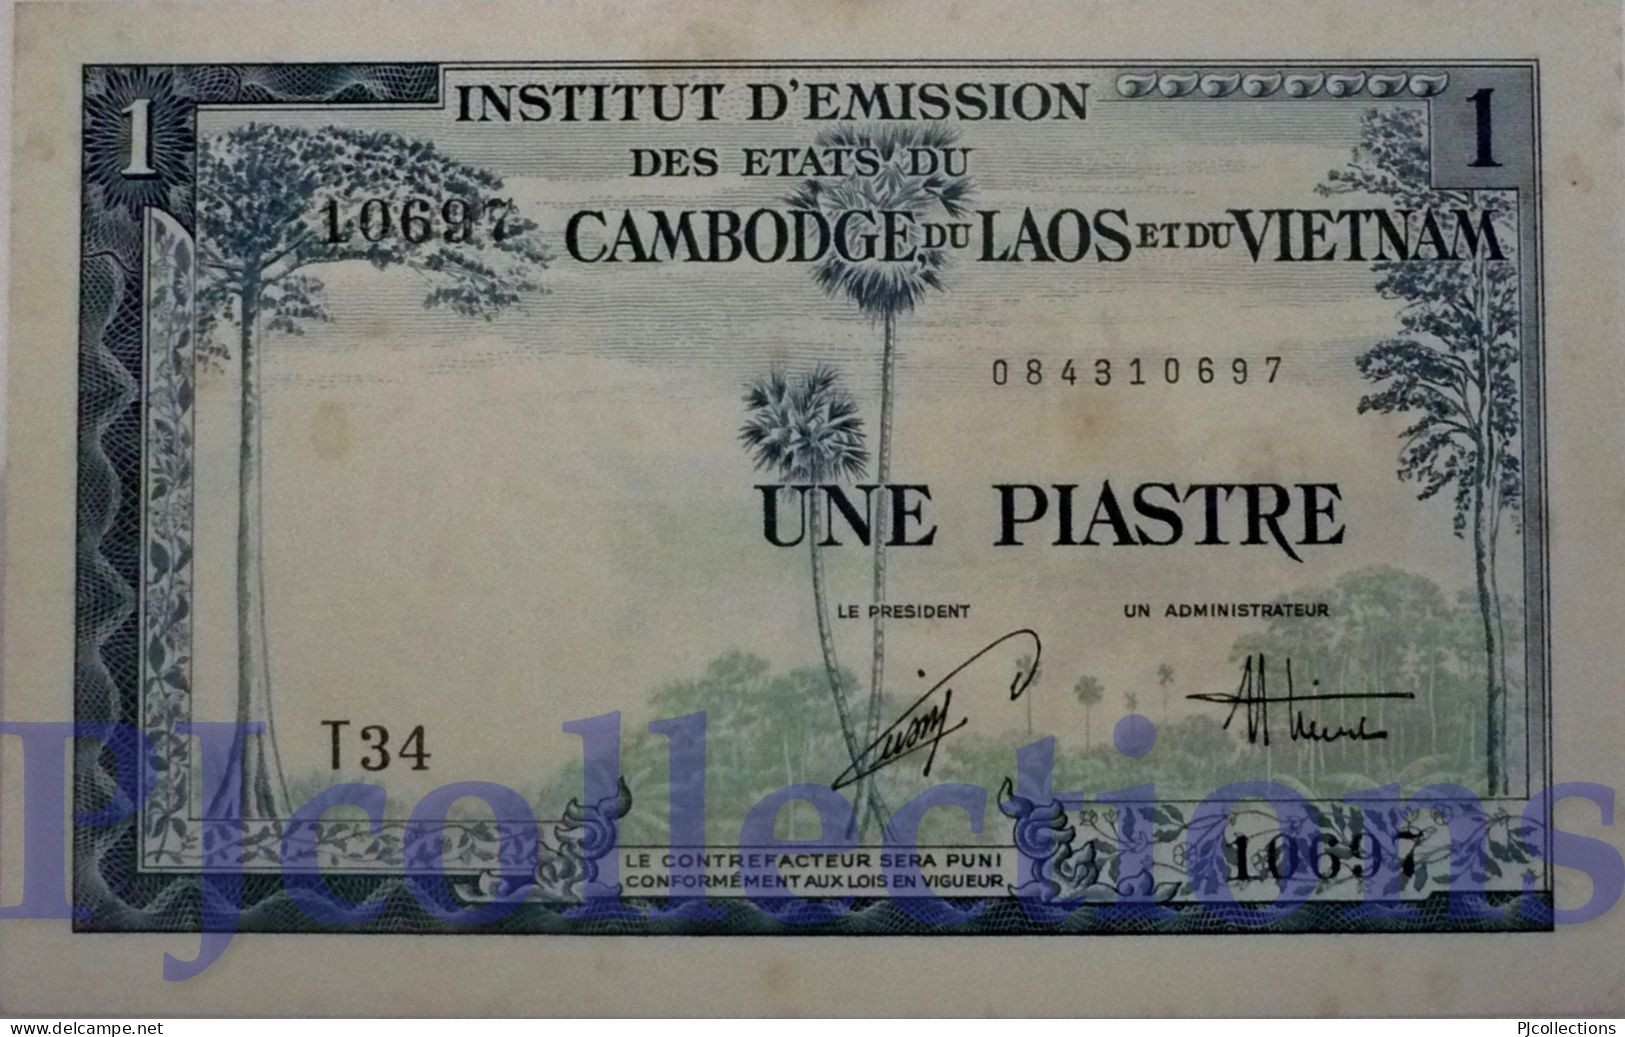 FRENCH INDOCHINA 1 PIASTRE 1954 PICK 105 AU/UNC W/LIGHT STAINS - Indochine